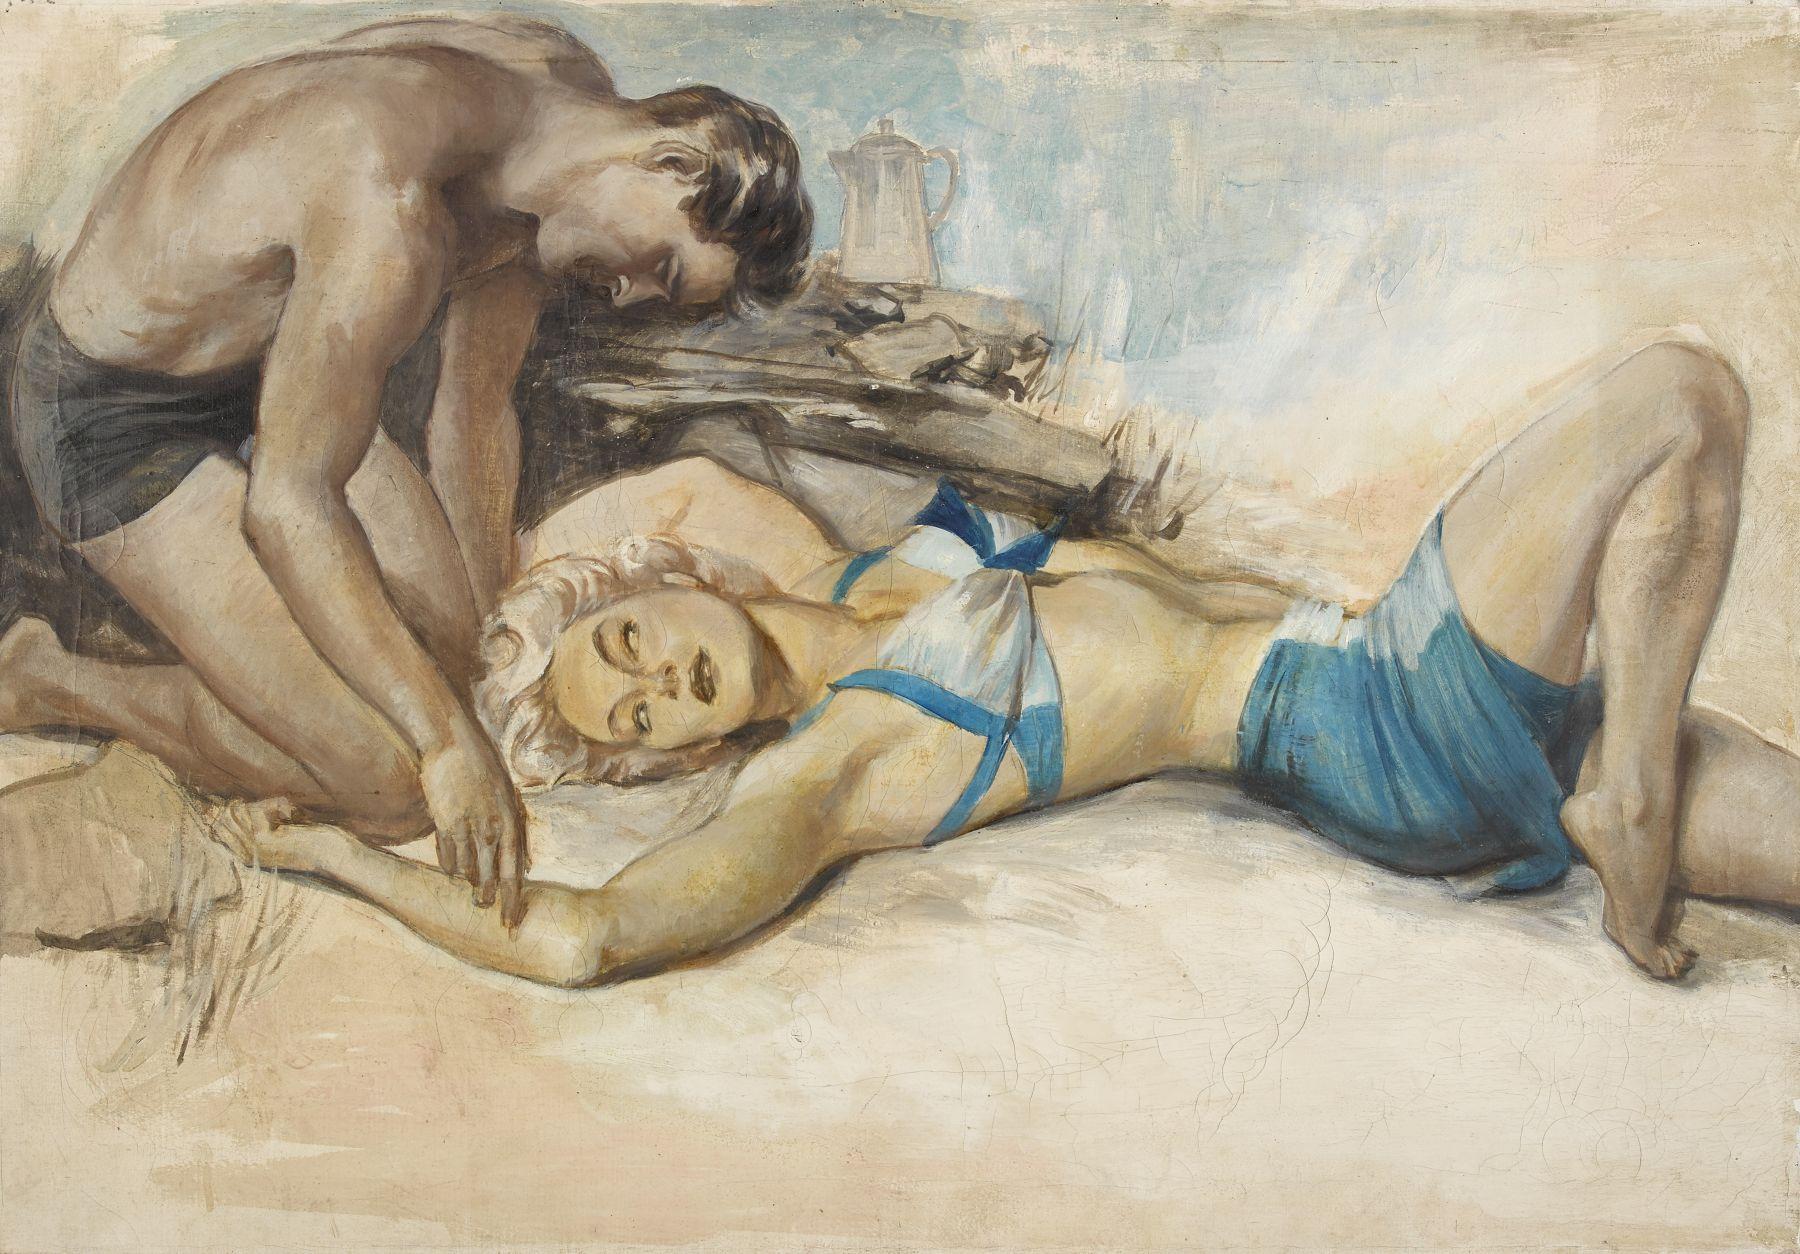 John Lagatta Figurative Painting - Woman in Blue Two-Piece Bathing Suit Laying on Beach with Man in Bathing Su